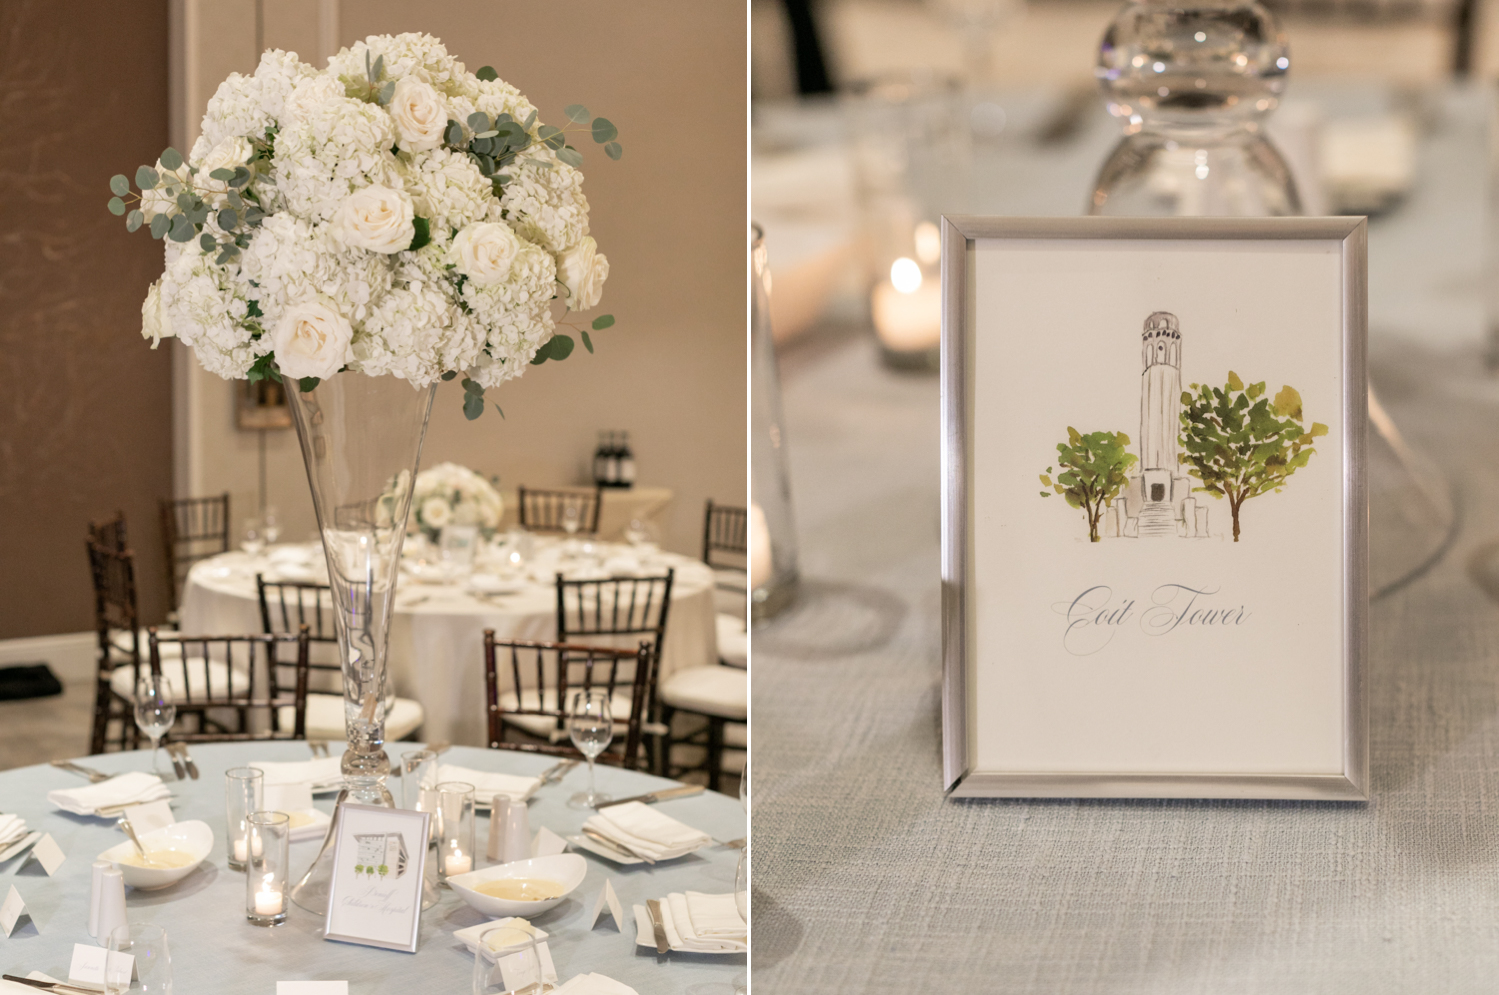 The table settings at the reception with white flowers and light. The table  numbers have watercolor paintings of places that are important to the bride and groom.